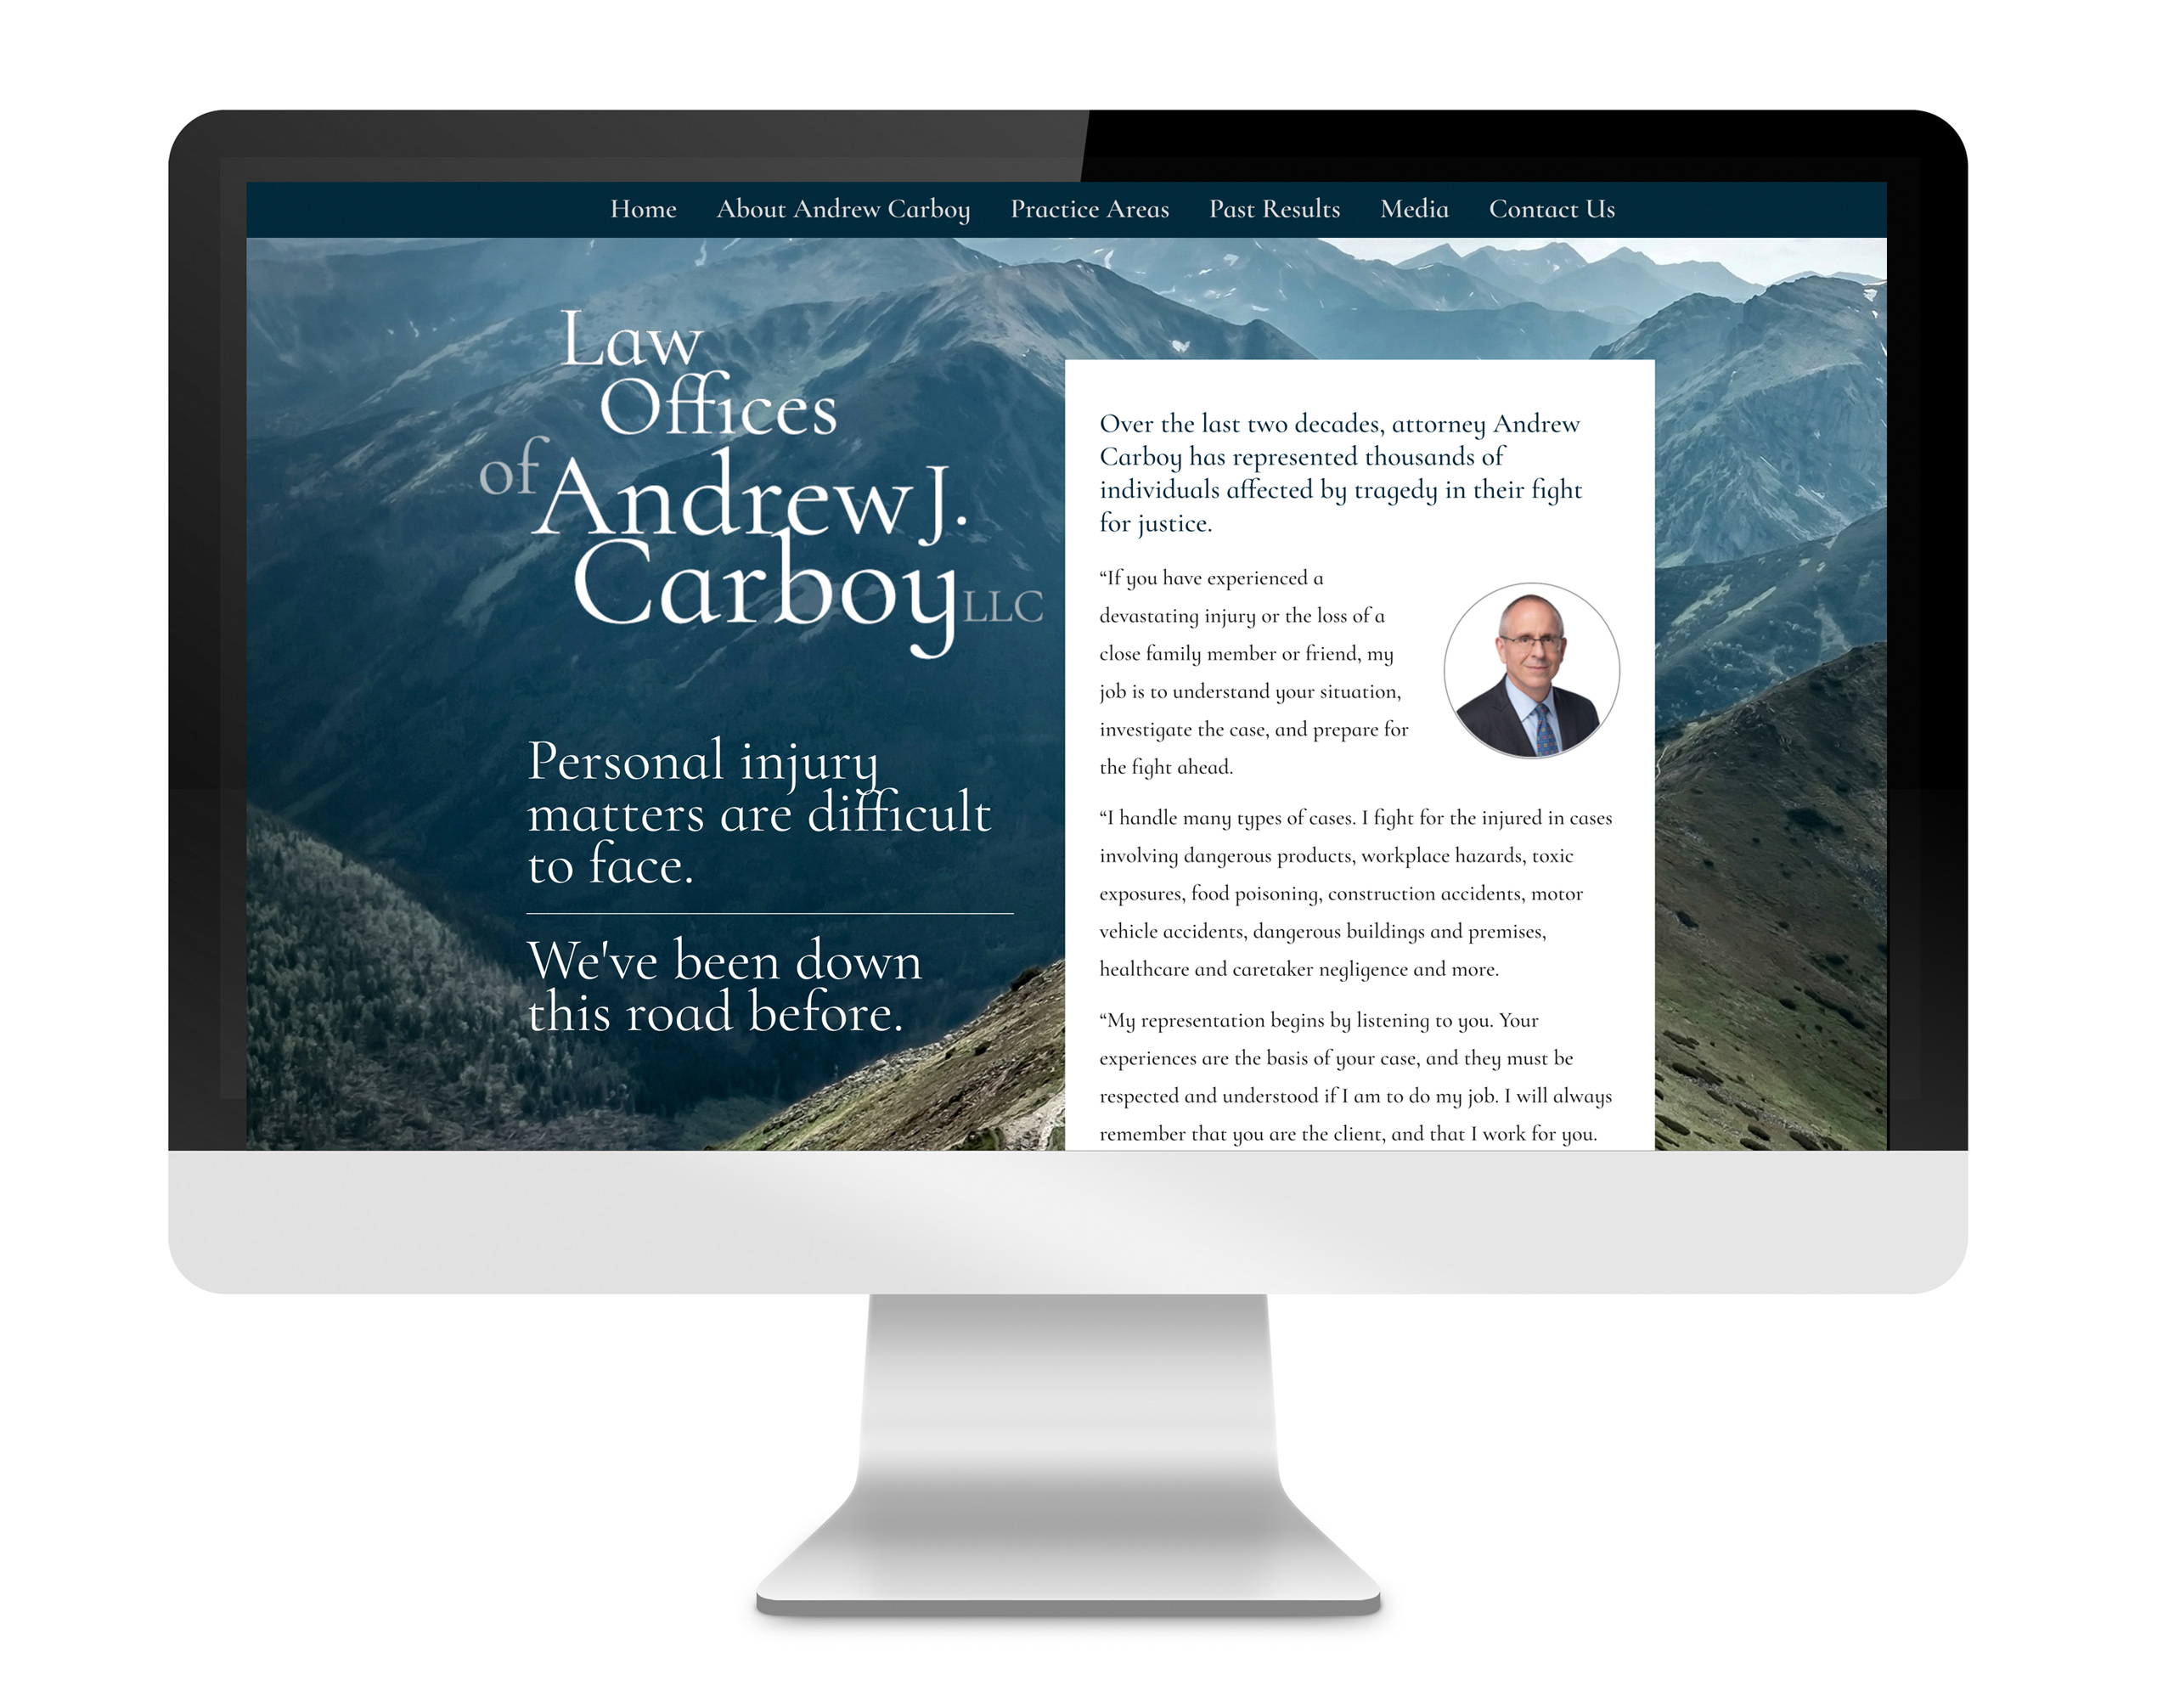 Andrew Carboy personal injury attorney website designed by DLS Design